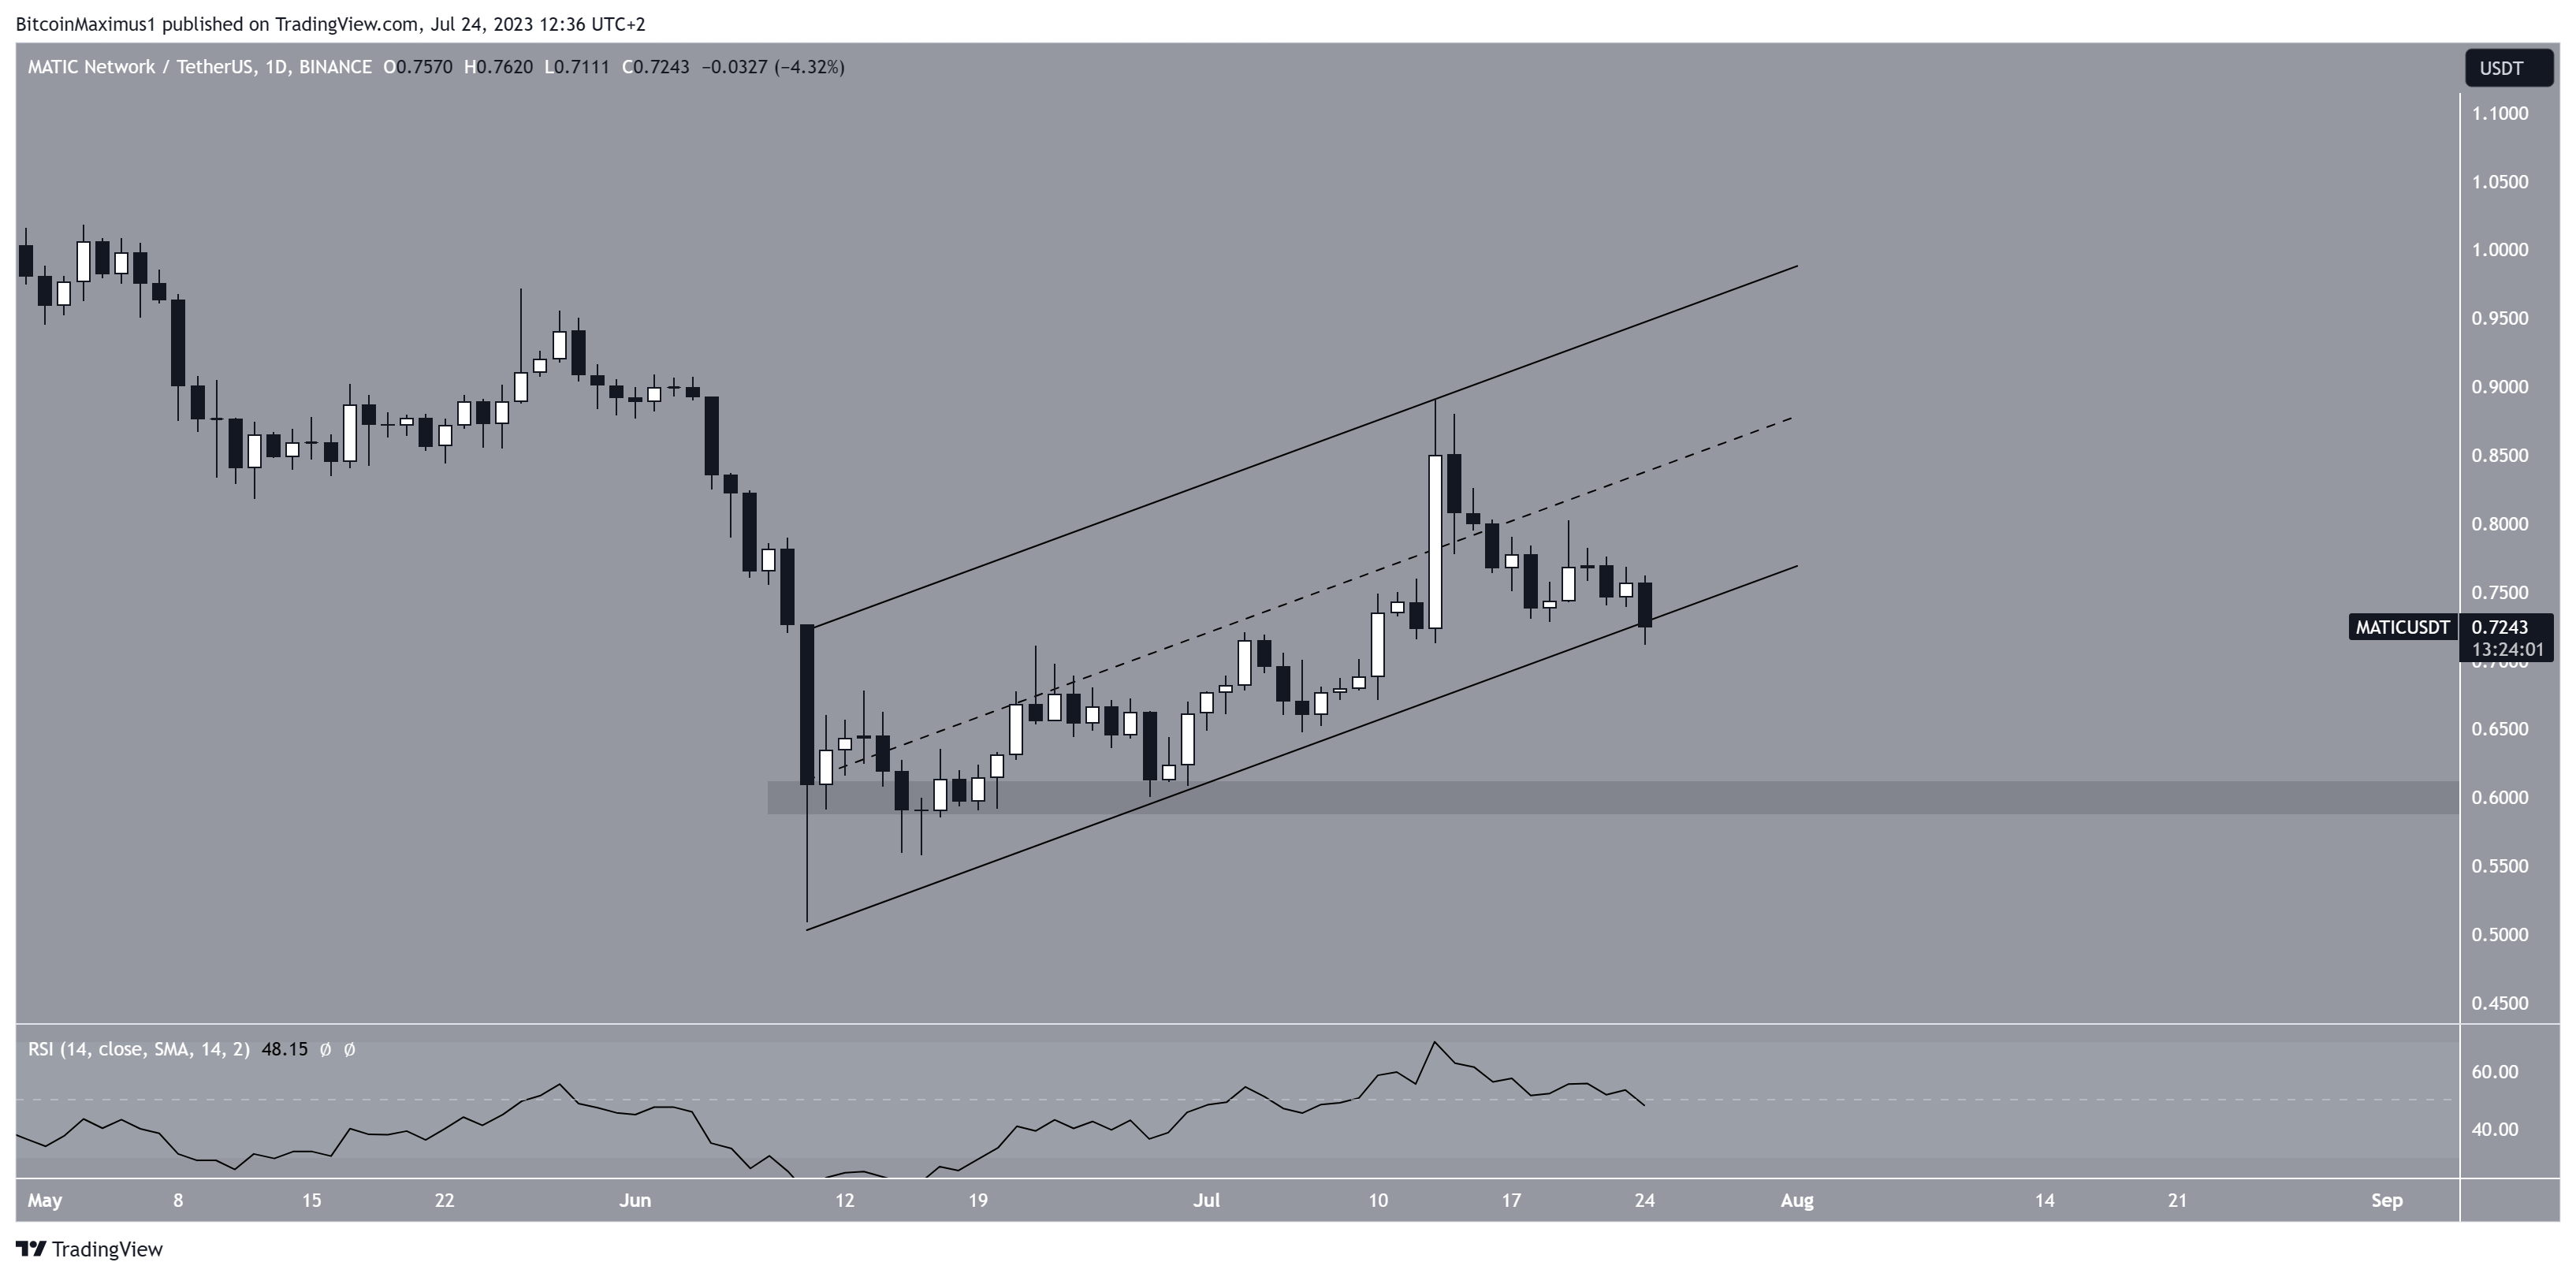 MATIC/USDT Daily Chart. Source: TradingView